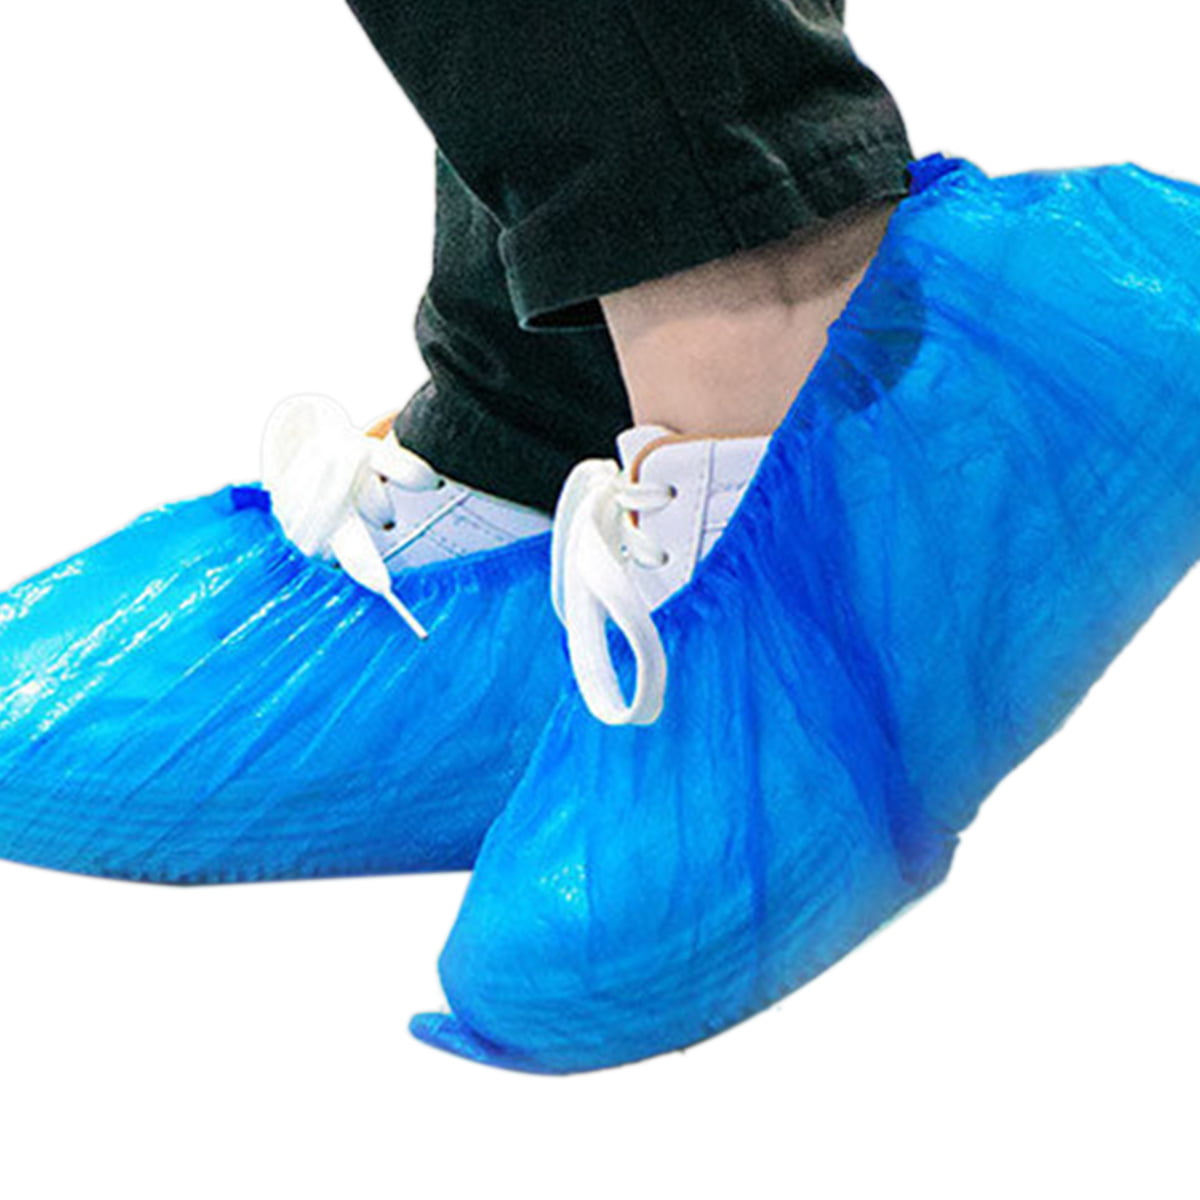 WATERPROOF SHOE COVERS PROTECTORS BLUE CE 1000 PAIRS x DISPOSABLE OVERSHOES 